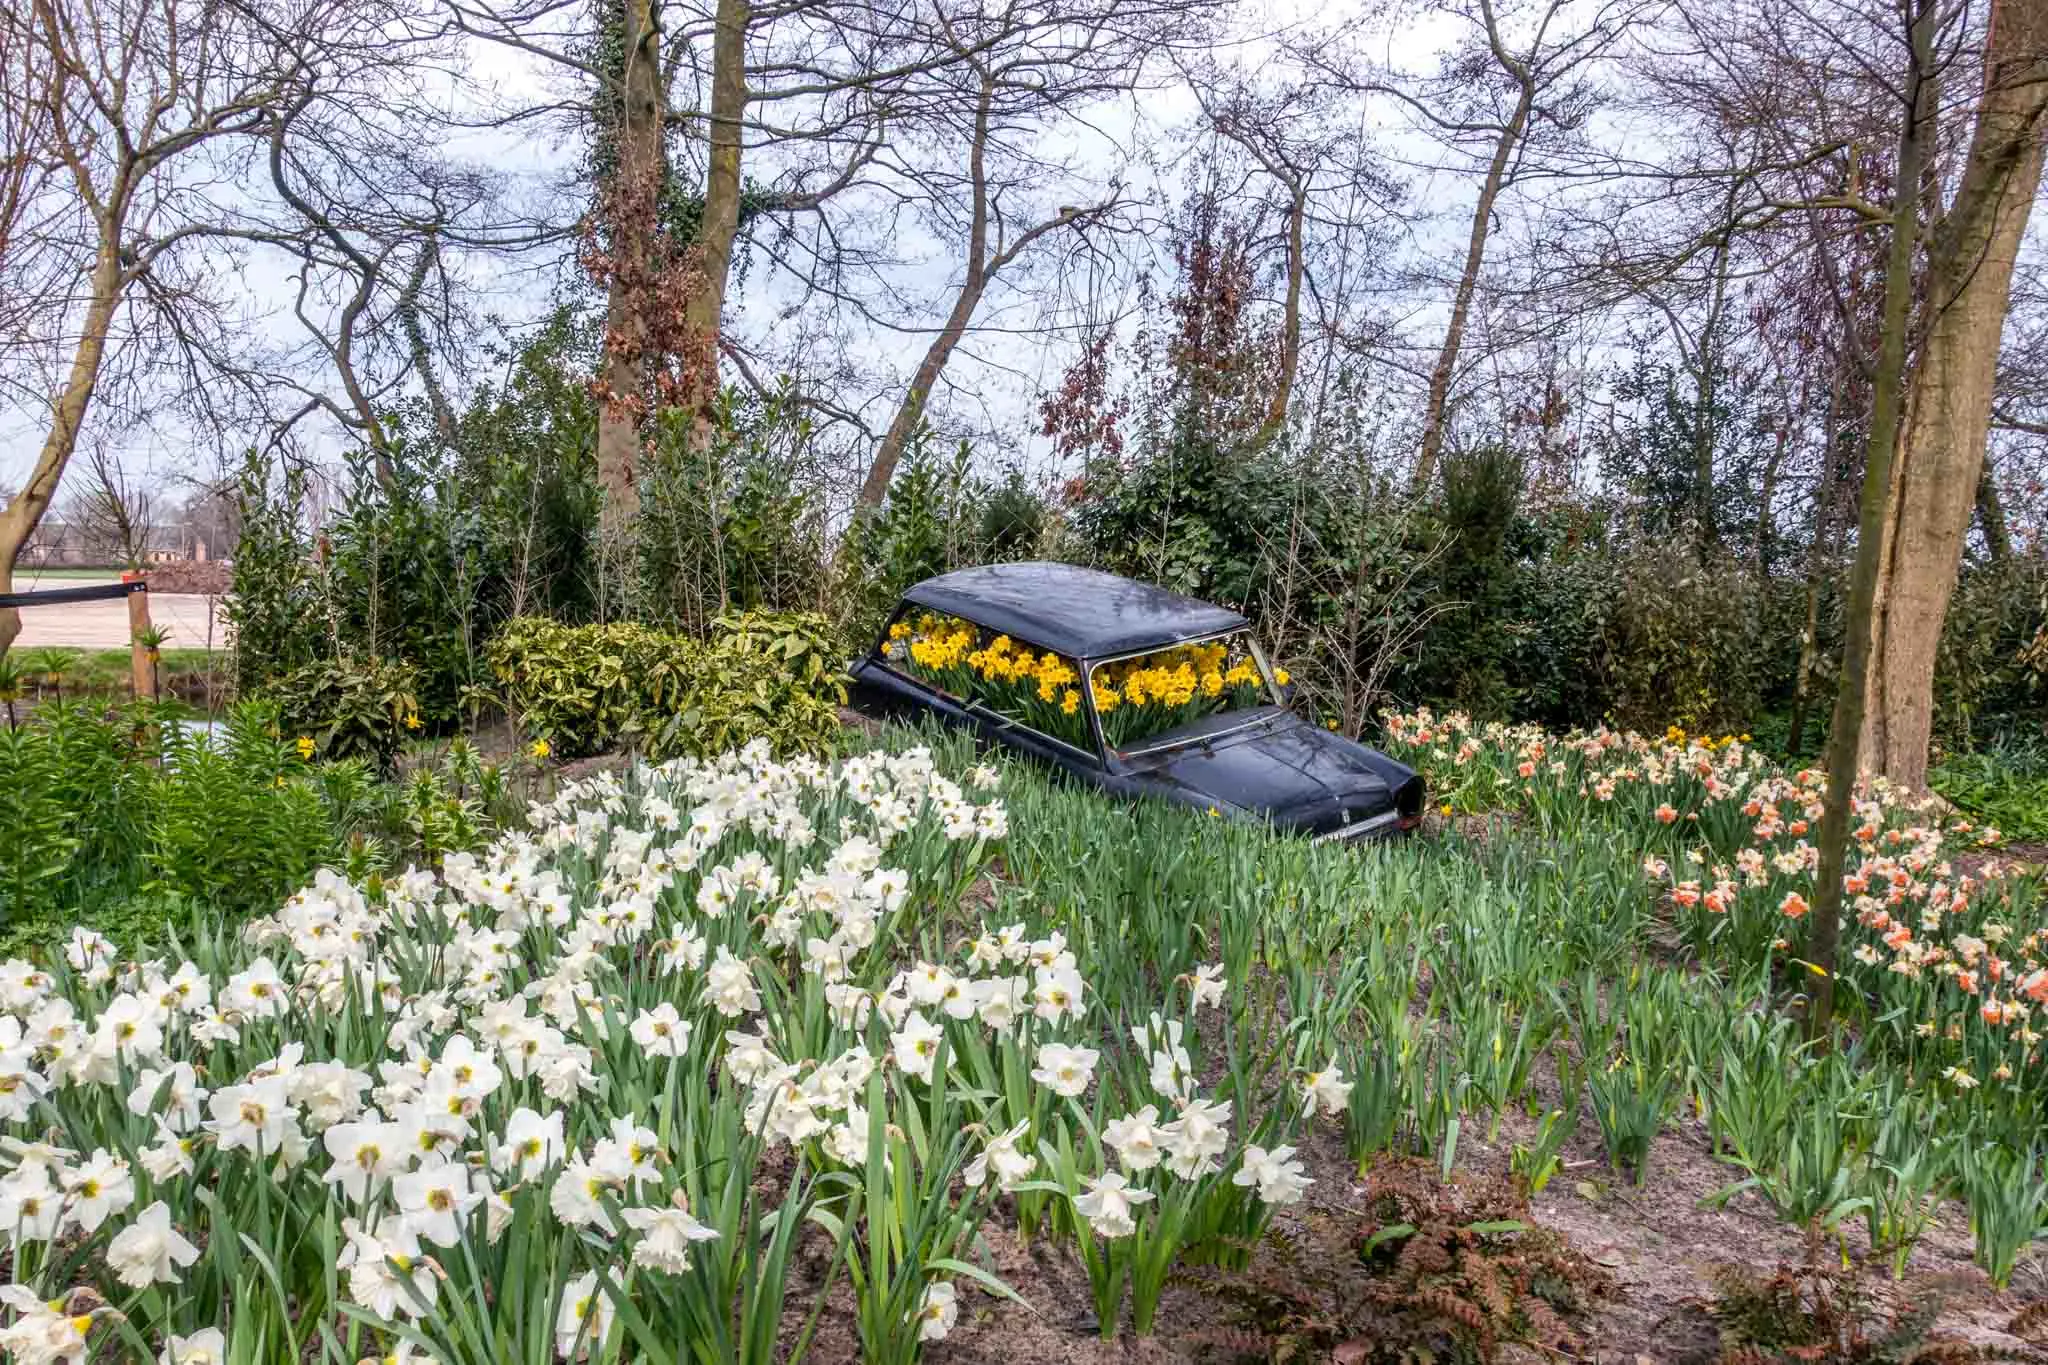 Car filled with flowers as part of an art installation